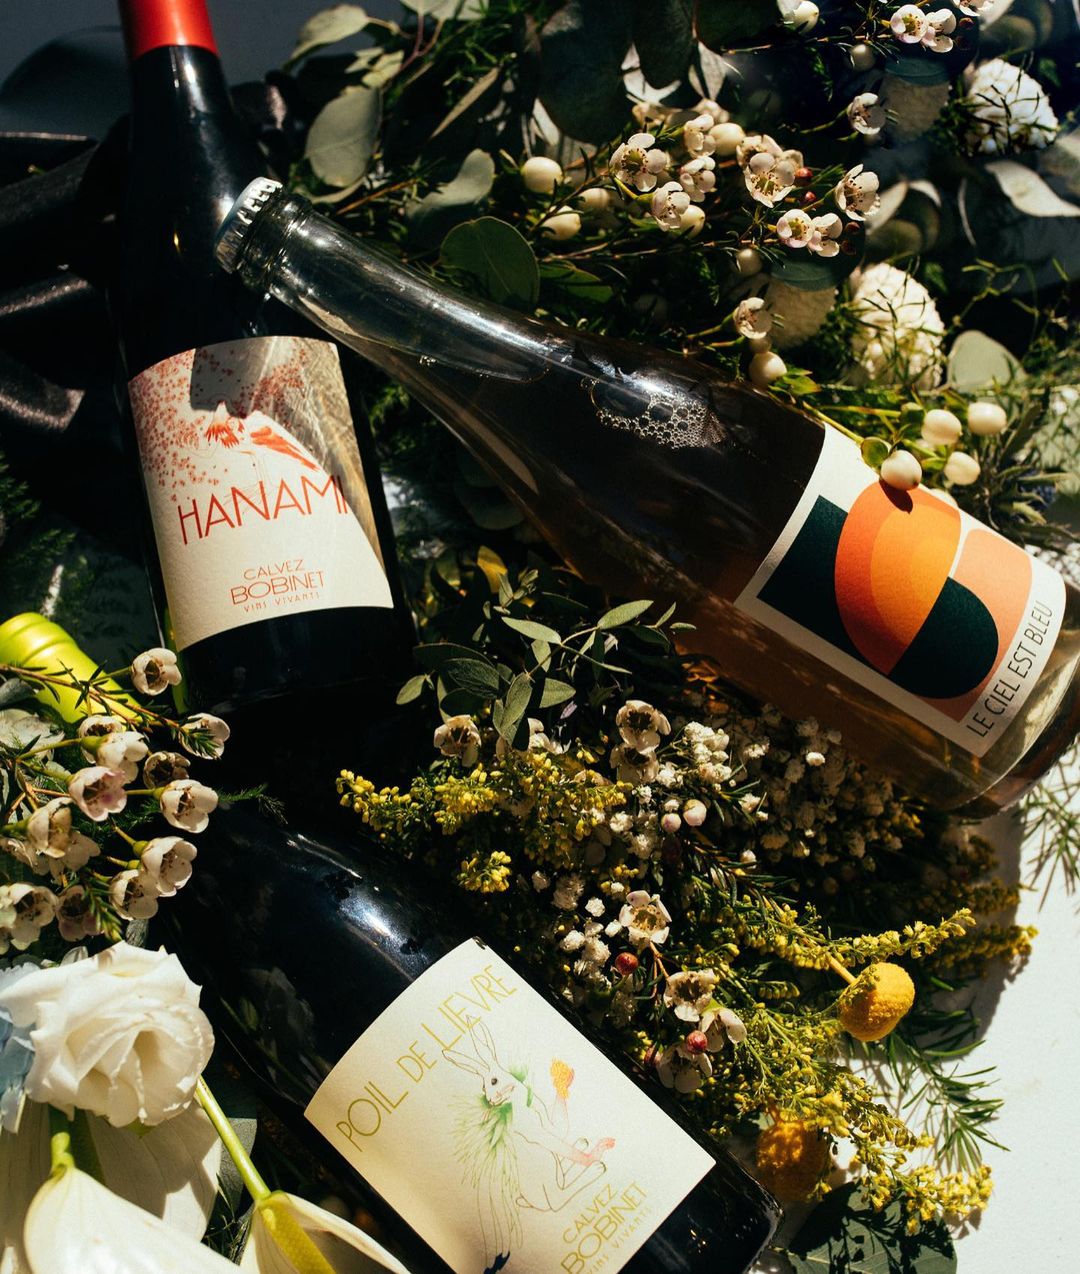 A selection of SomeLove's natural wines